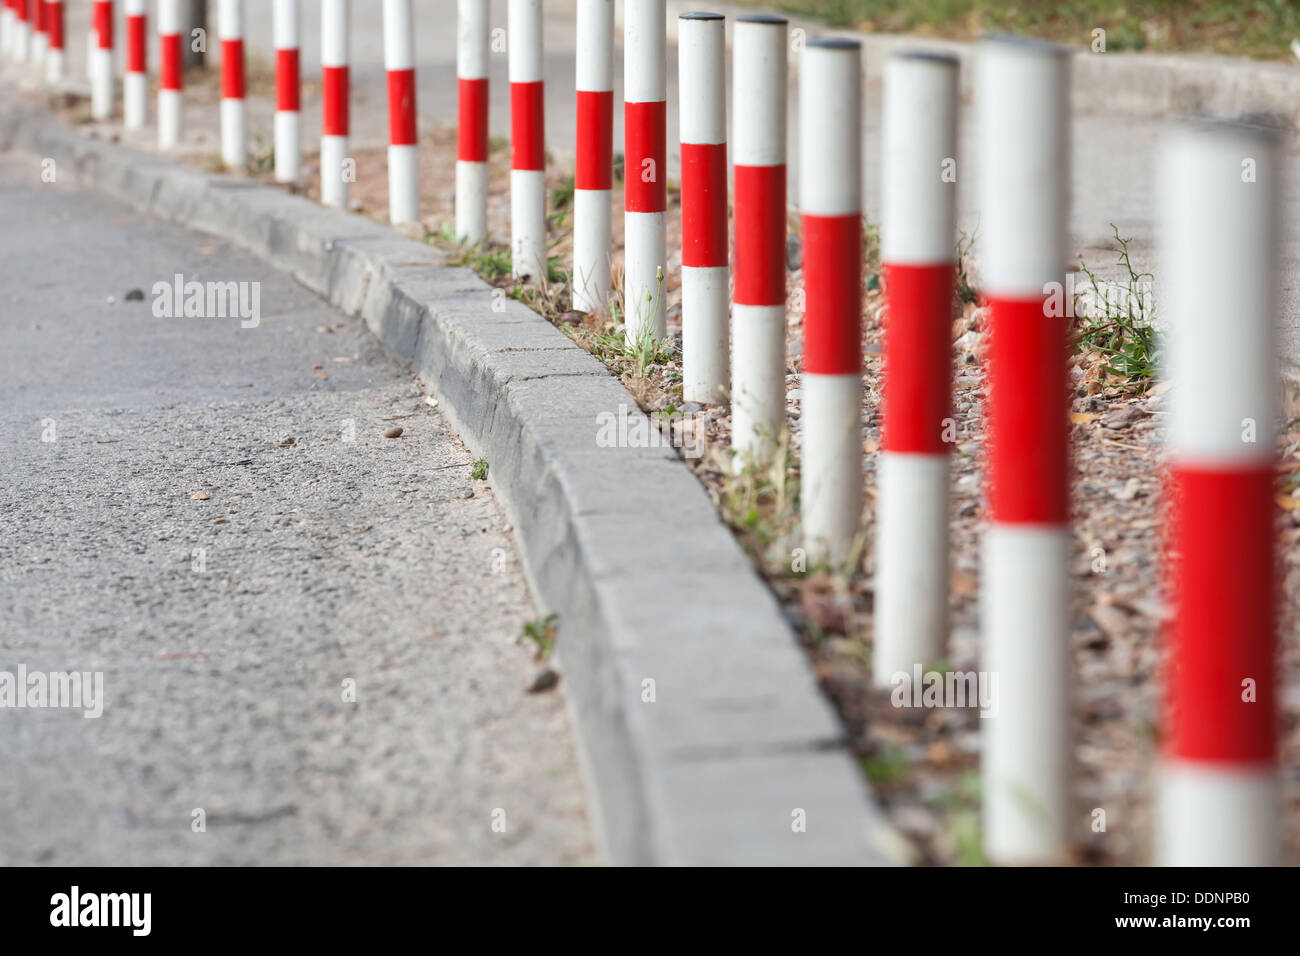 Striped red and white signal poles stand on border of asphalt roadside Stock Photo